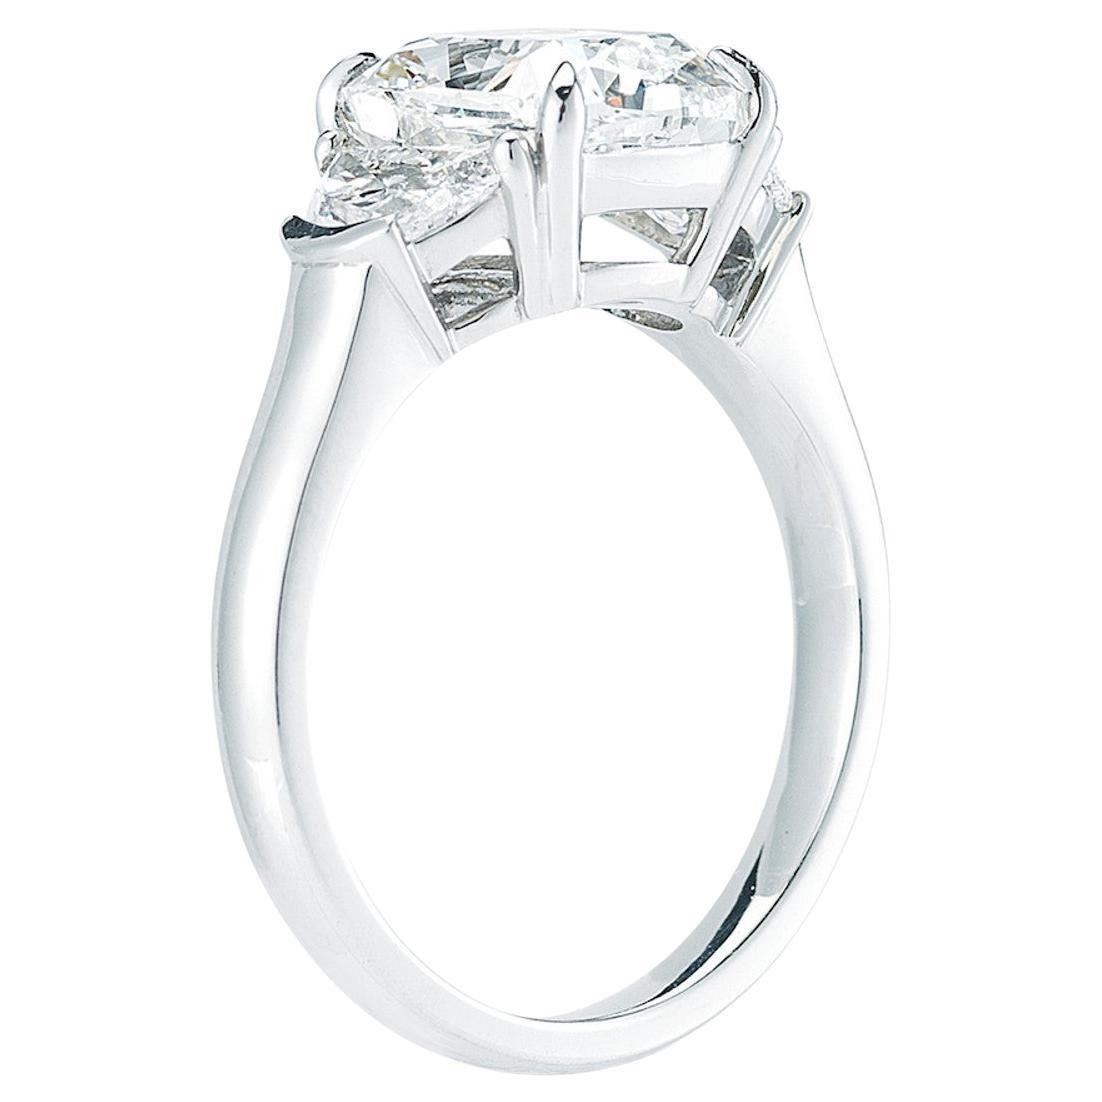 From the prestigious Antinori Di Sanpietro collection comes an engagement ring that is a true masterpiece. At the heart of this creation is a 5 carat cushion modified brilliant diamond. The diamond, graded F for color, radiates a dazzling white